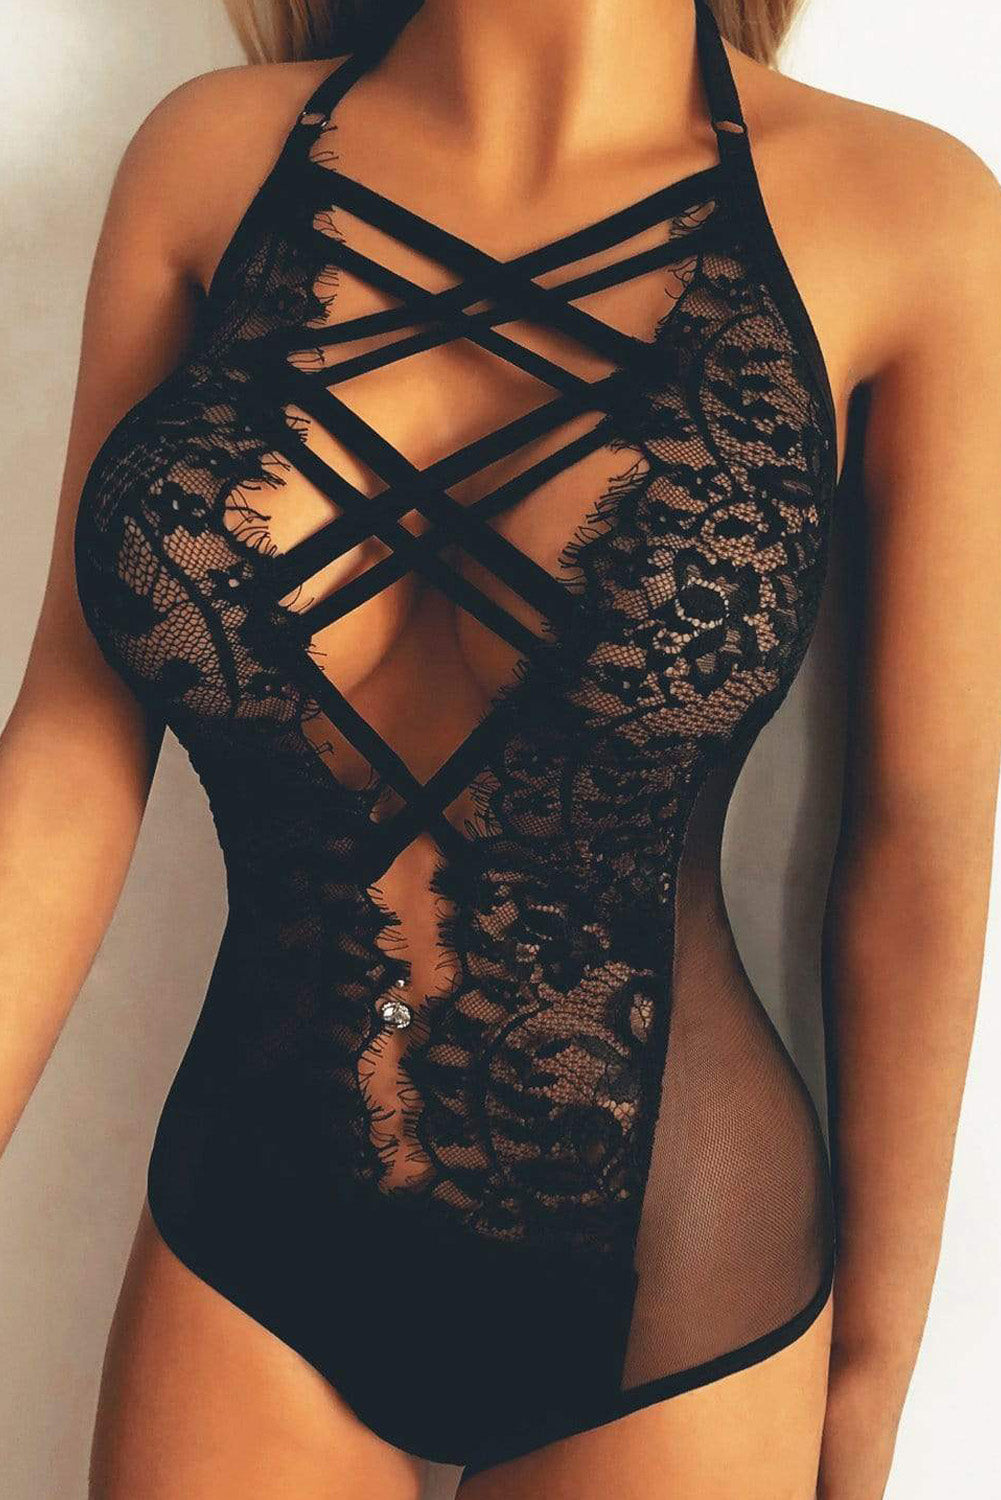 Women's Fashion Sexy Solid Color Strappy Bodysuit Sweet Darkness Lace Goth Lingerie Sai Feel